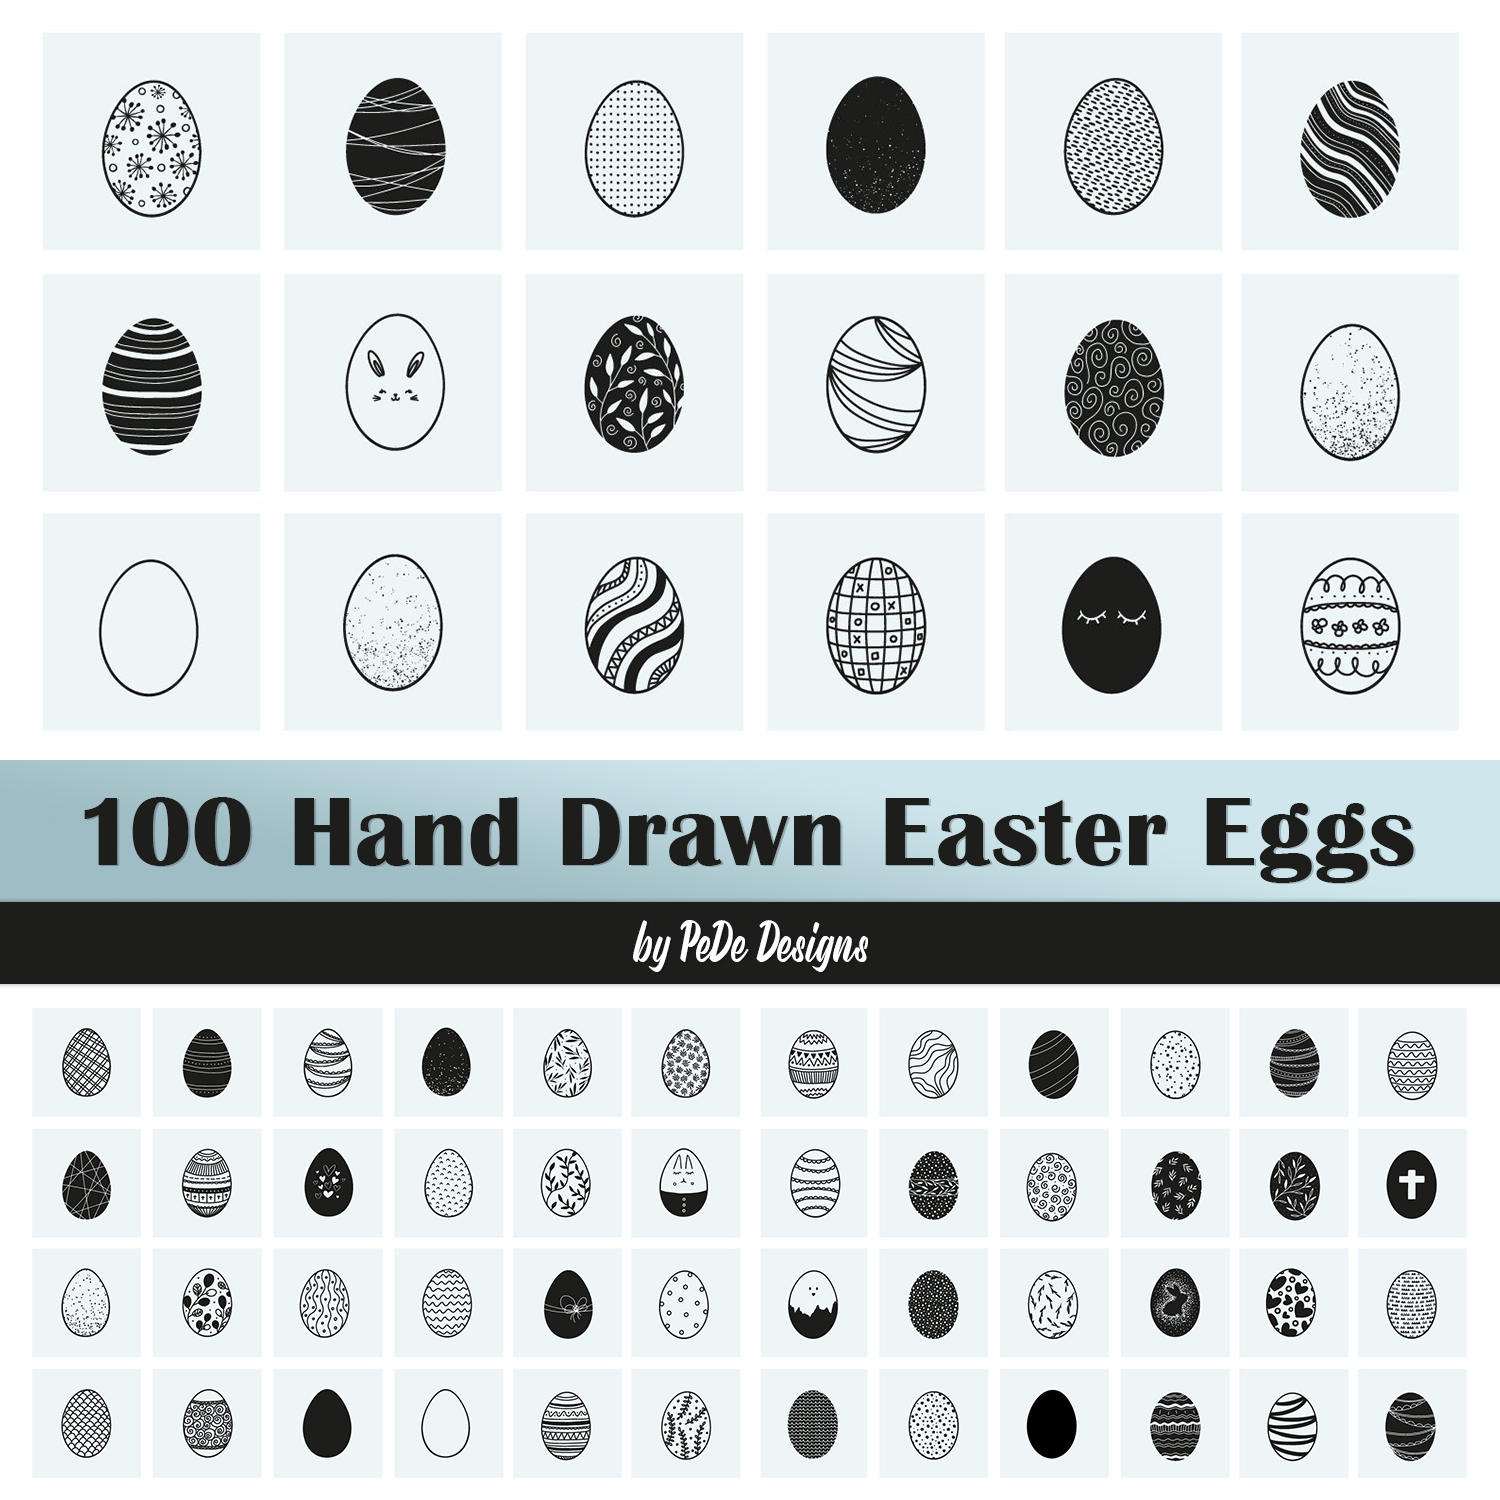 100 Hand Drawn Easter Eggs cover.